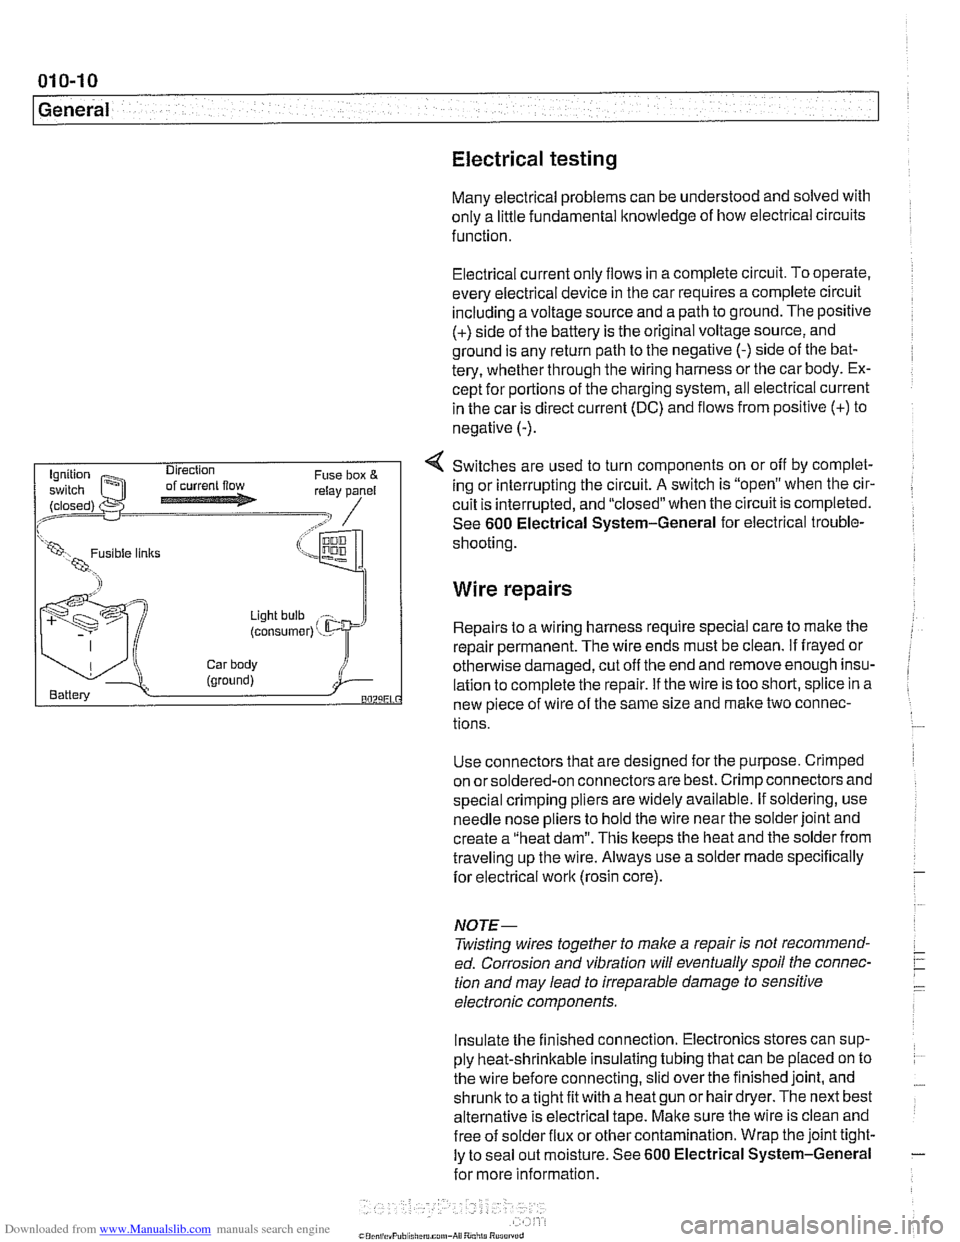 BMW 528i 1998 E39 Workshop Manual Downloaded from www.Manualslib.com manuals search engine 
01 0-1 0 
General 
Electrical testing 
Many electrical problems  can be understood and solved with 
only a little fundamental  knowledge  of h